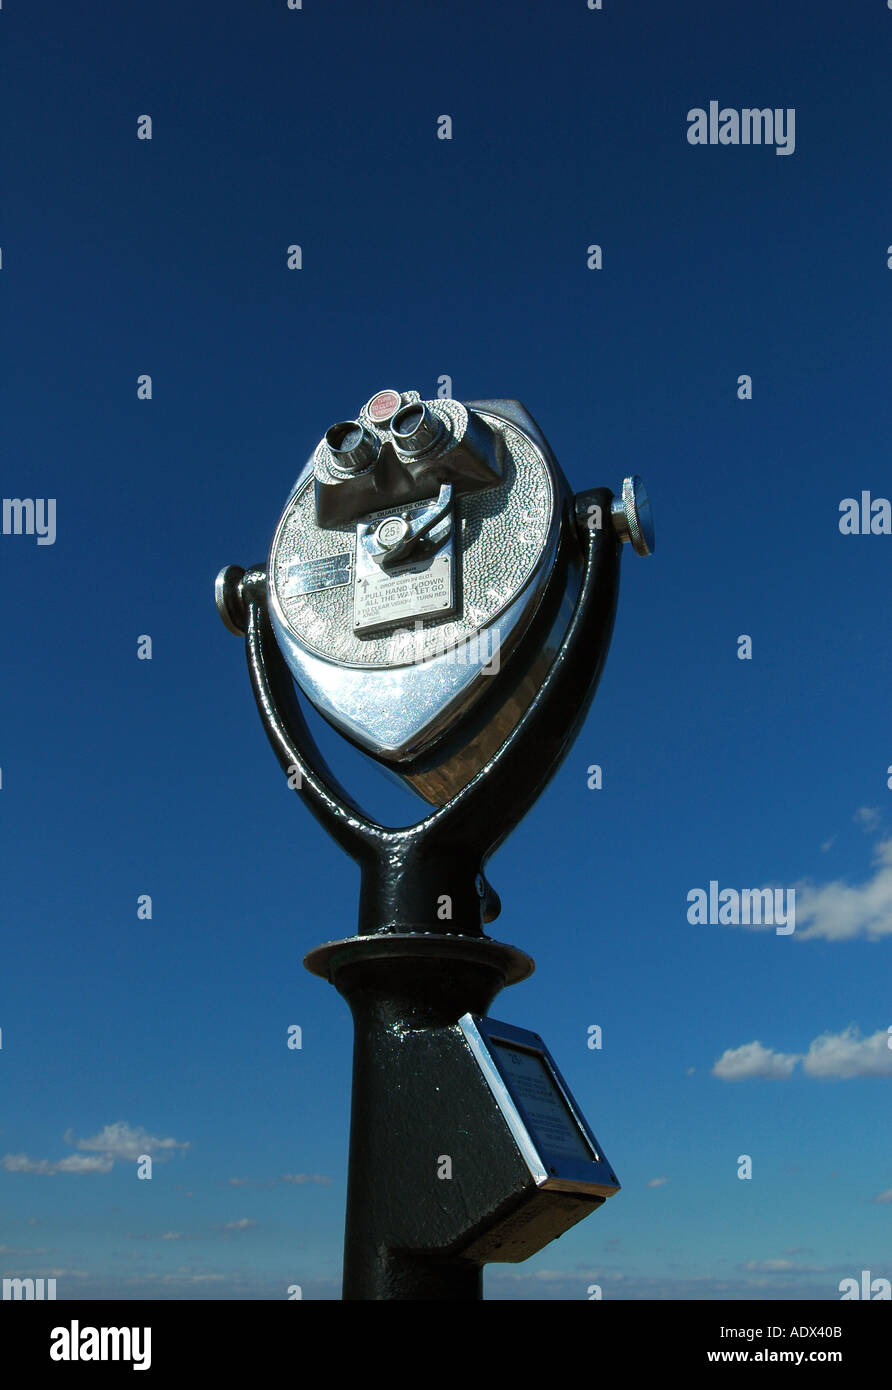 Coin operated binoculars at a tourist destination Stock Photo